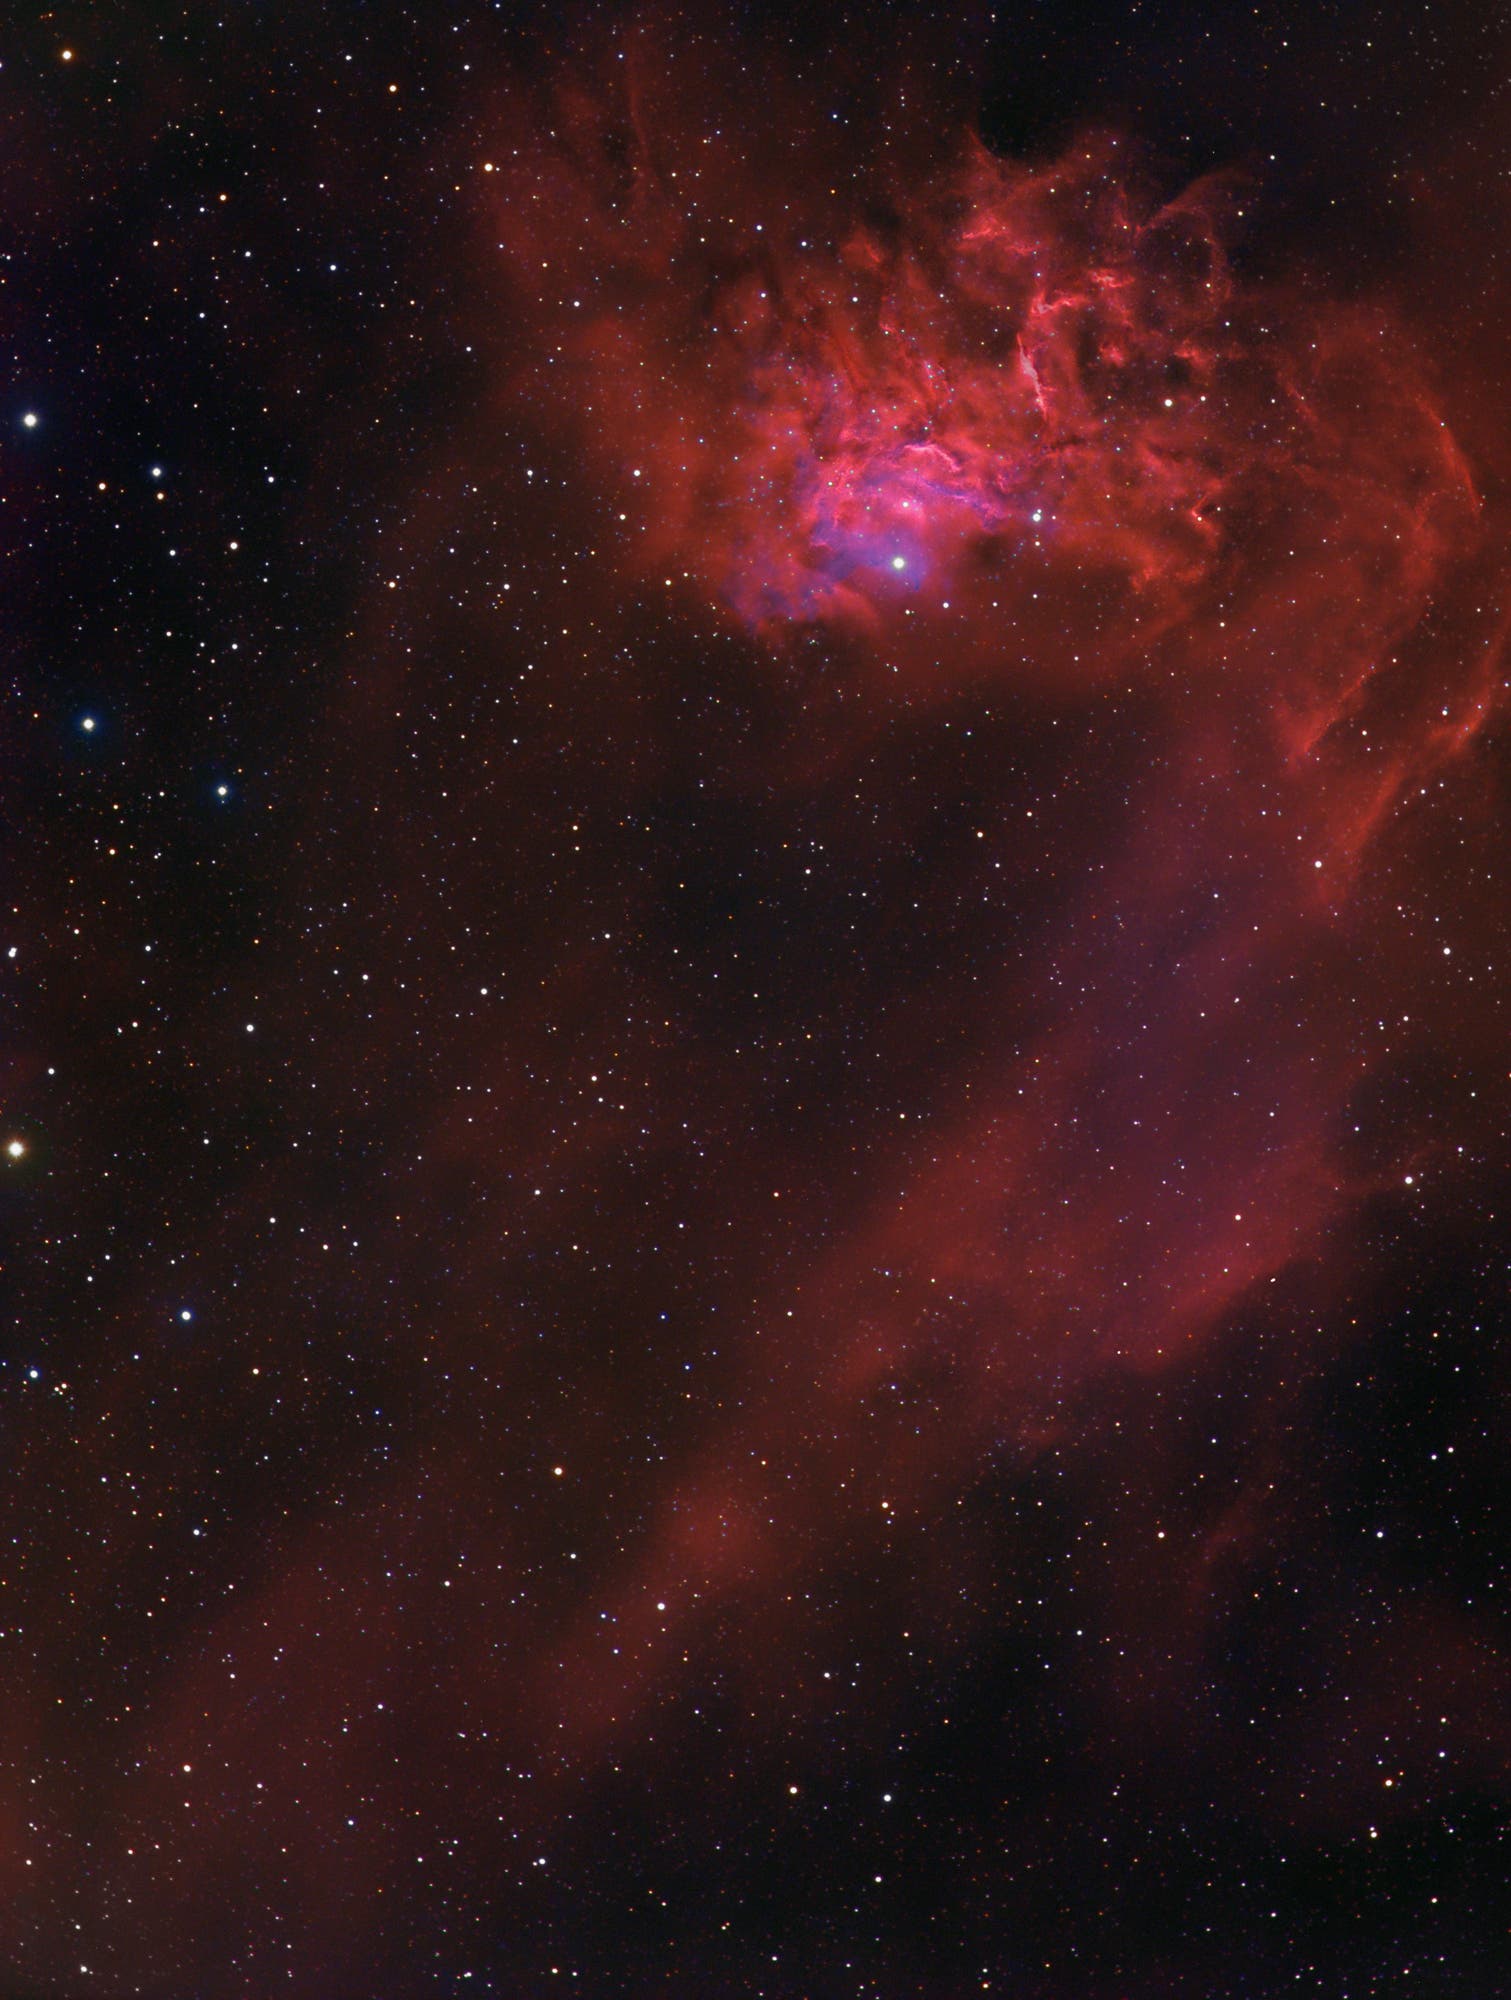 IC 405, The Flaming Star